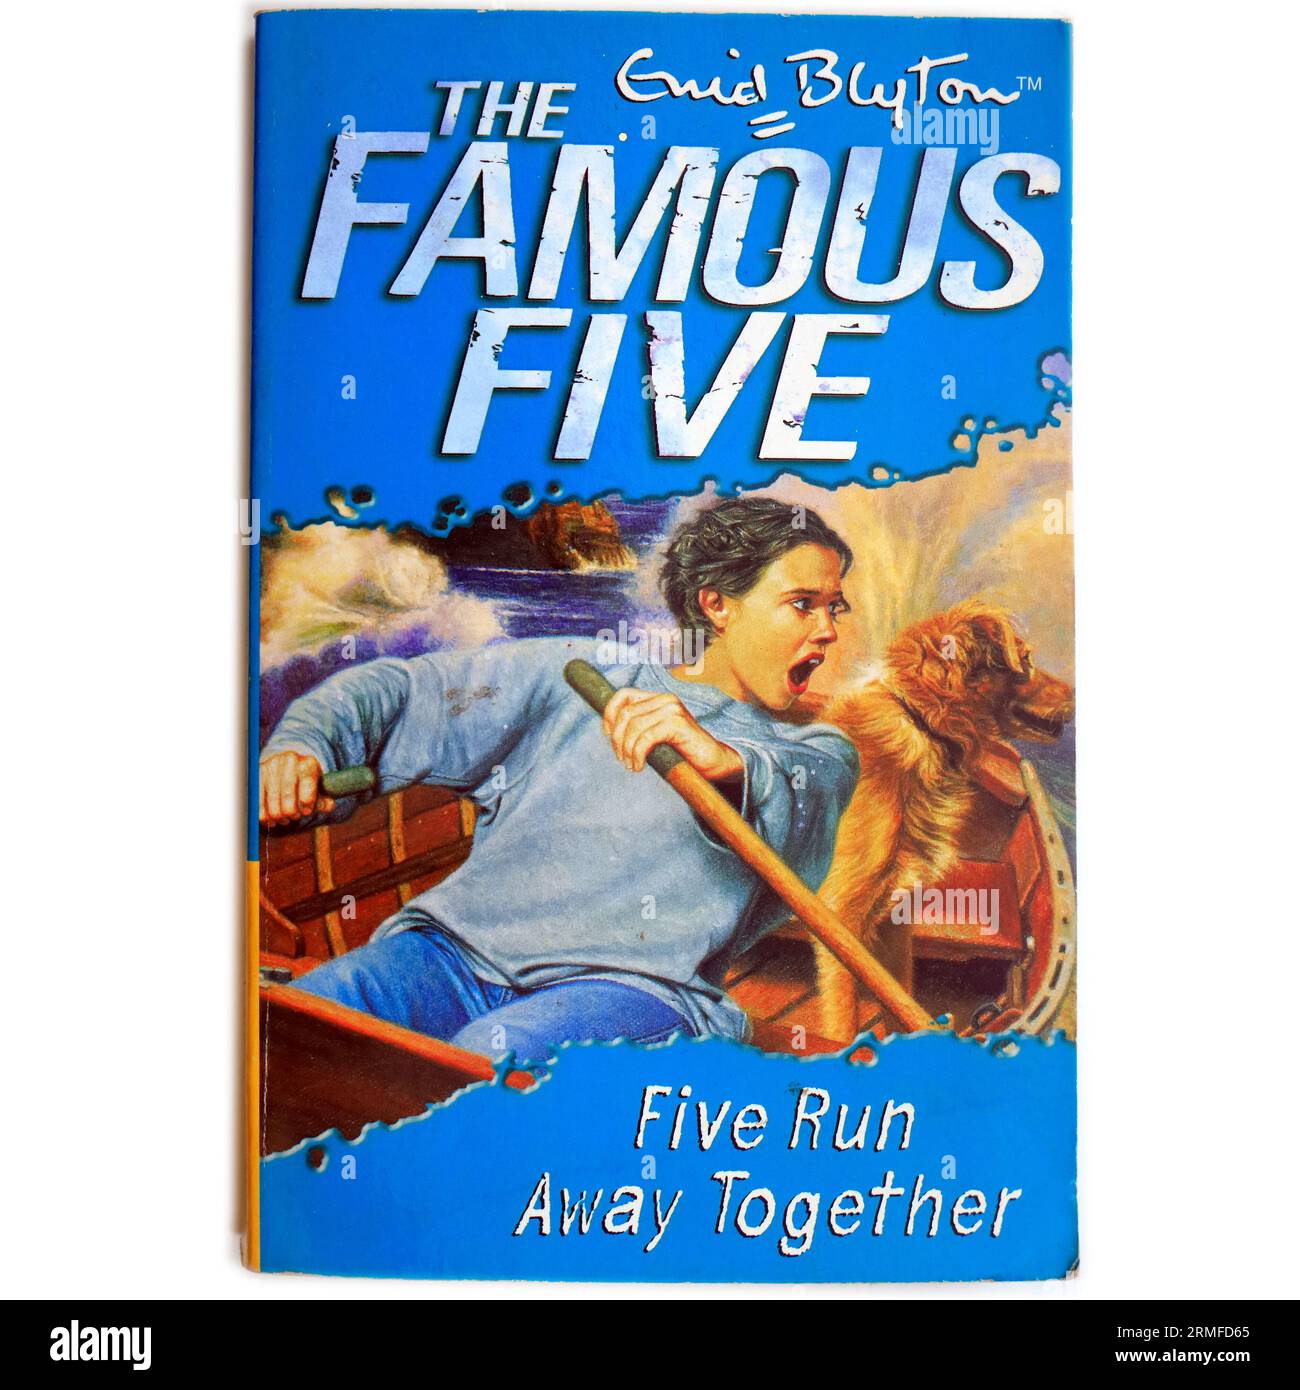 Enid Blyton - The Famous Five - Five Run Away Together. Paperback book cover on white background Stock Photo